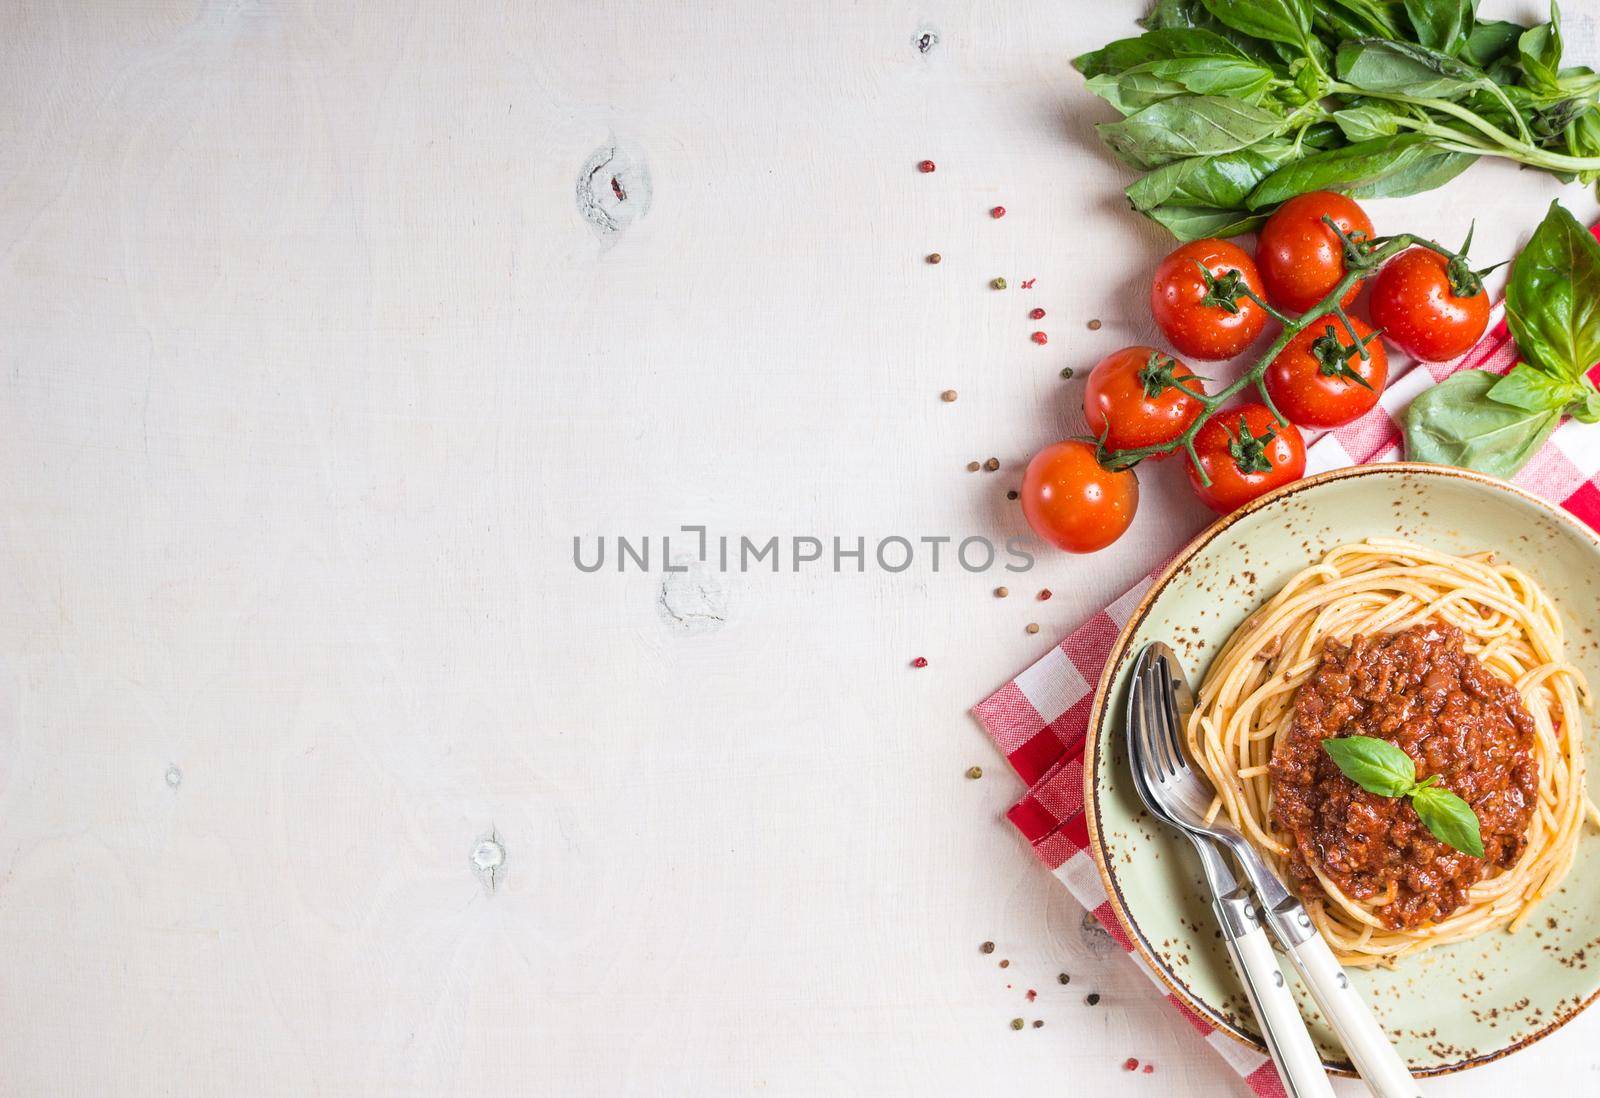 Italian pasta bolognese. Spaghetti with meat and tomato sauce in a plate with Italian tablecloth on a wooden white background. With fresh cherry tomatoes, basil. Food frame. Space for text. Top view